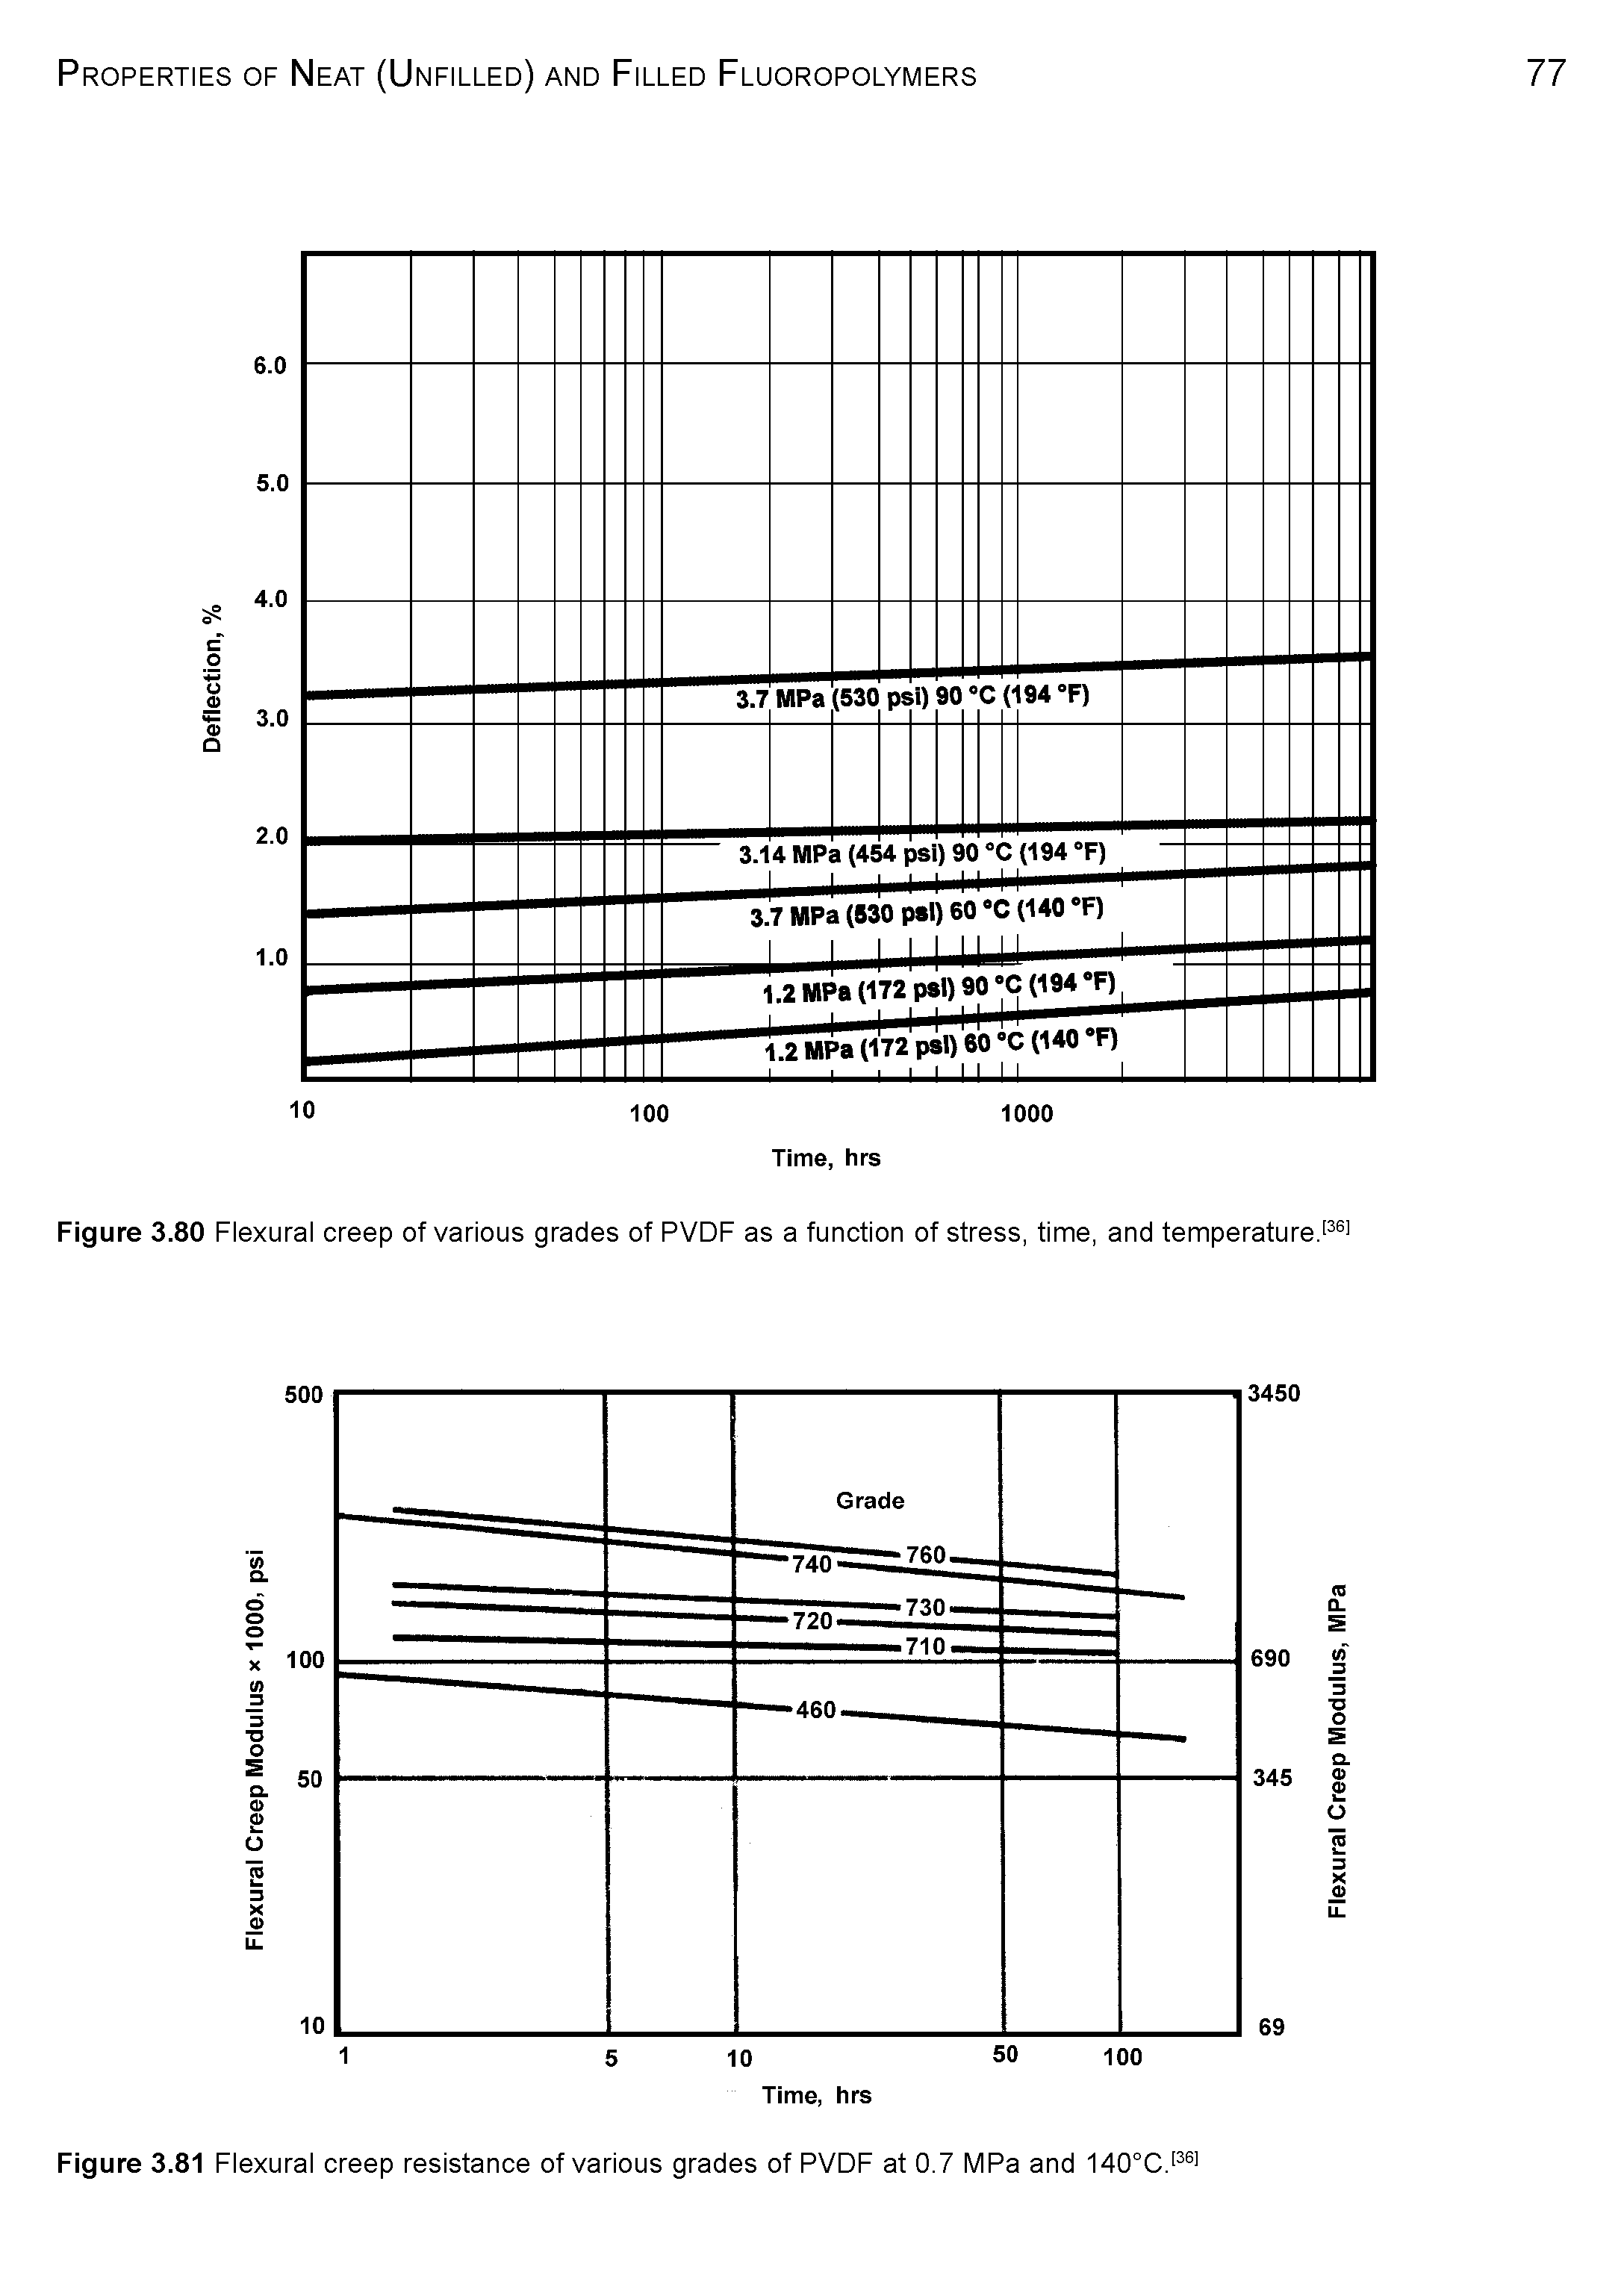 Figure 3.80 Flexural creep of various grades of PVDF as a function of stress, time, and temperature.